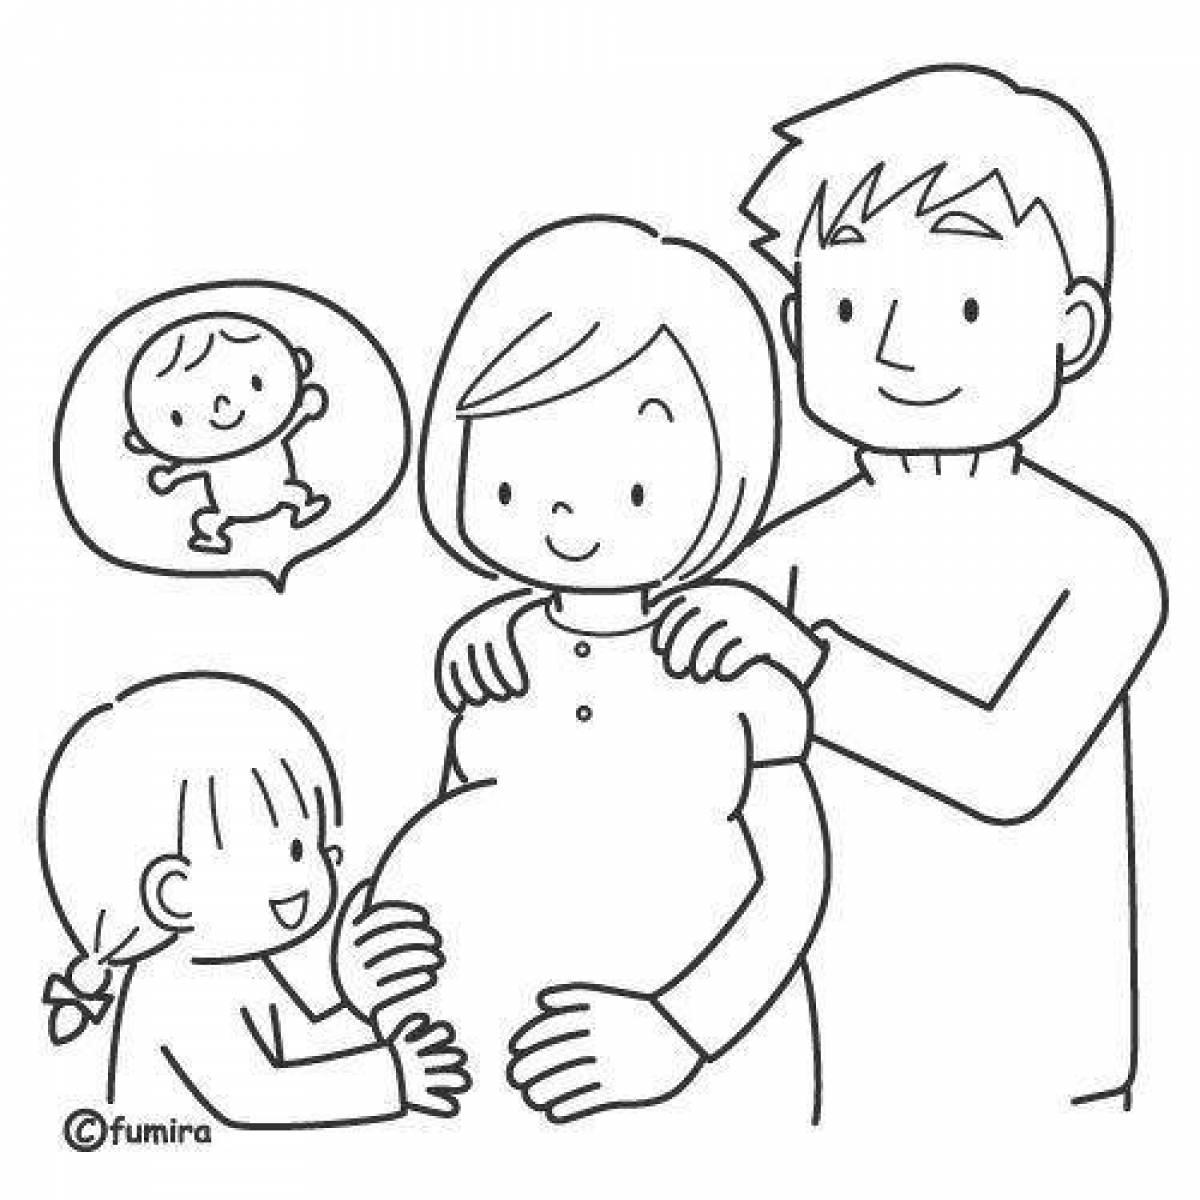 Serene mom and dad coloring pages